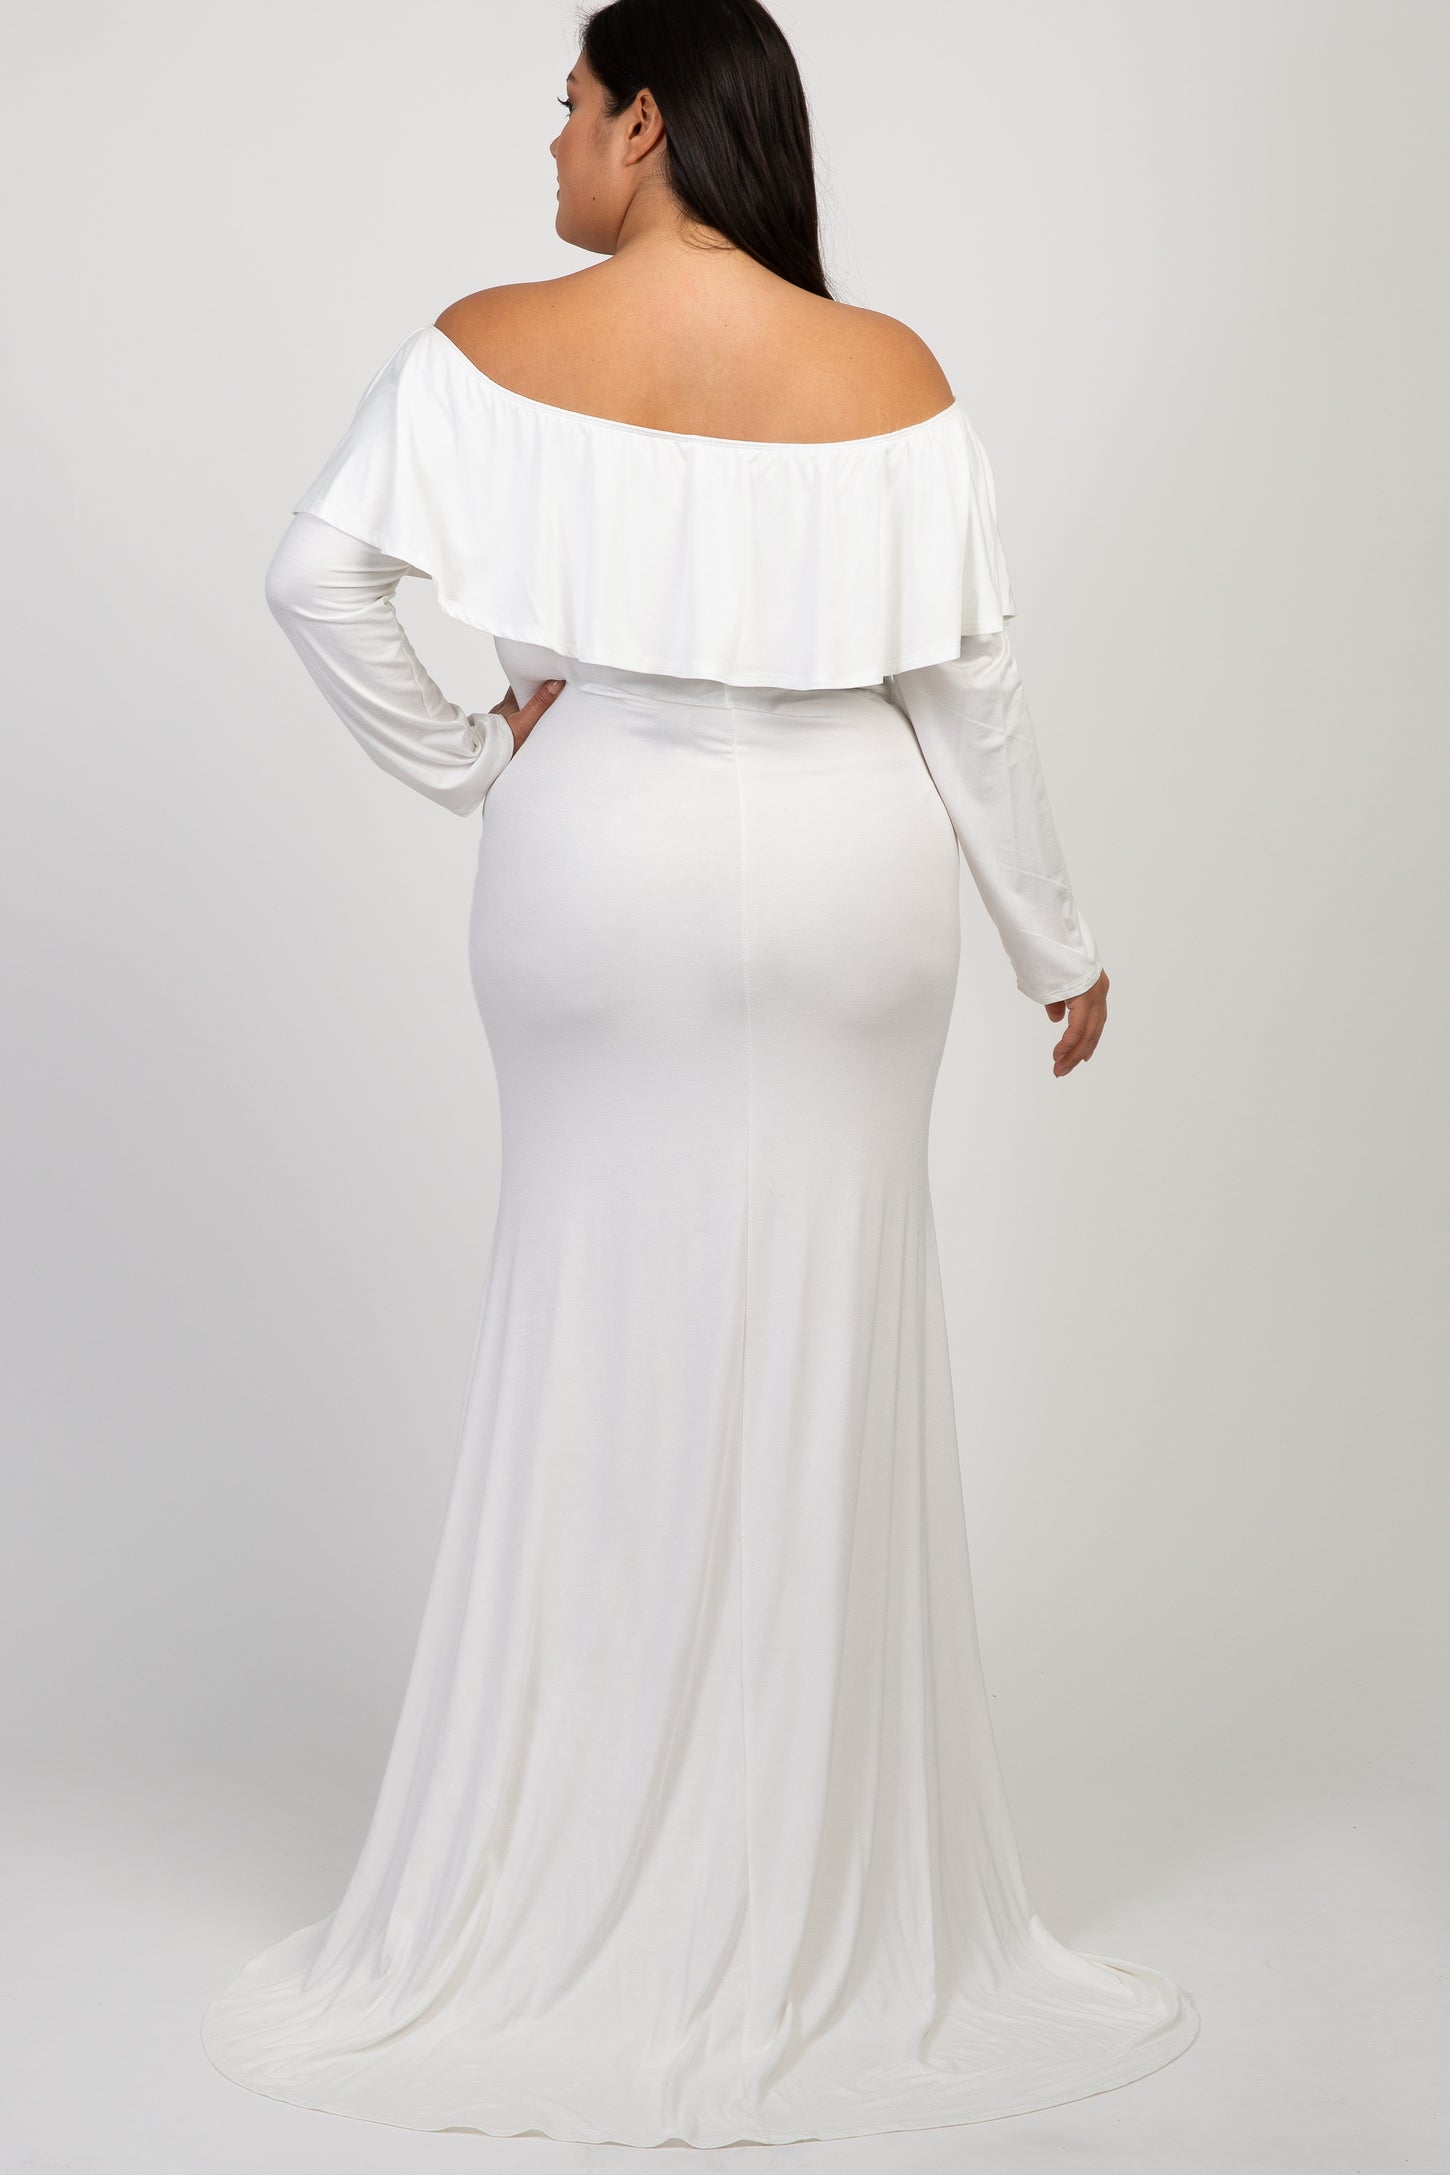 Ivory Off Shoulder Ruffle Maternity Plus Photoshoot Gown/Dress